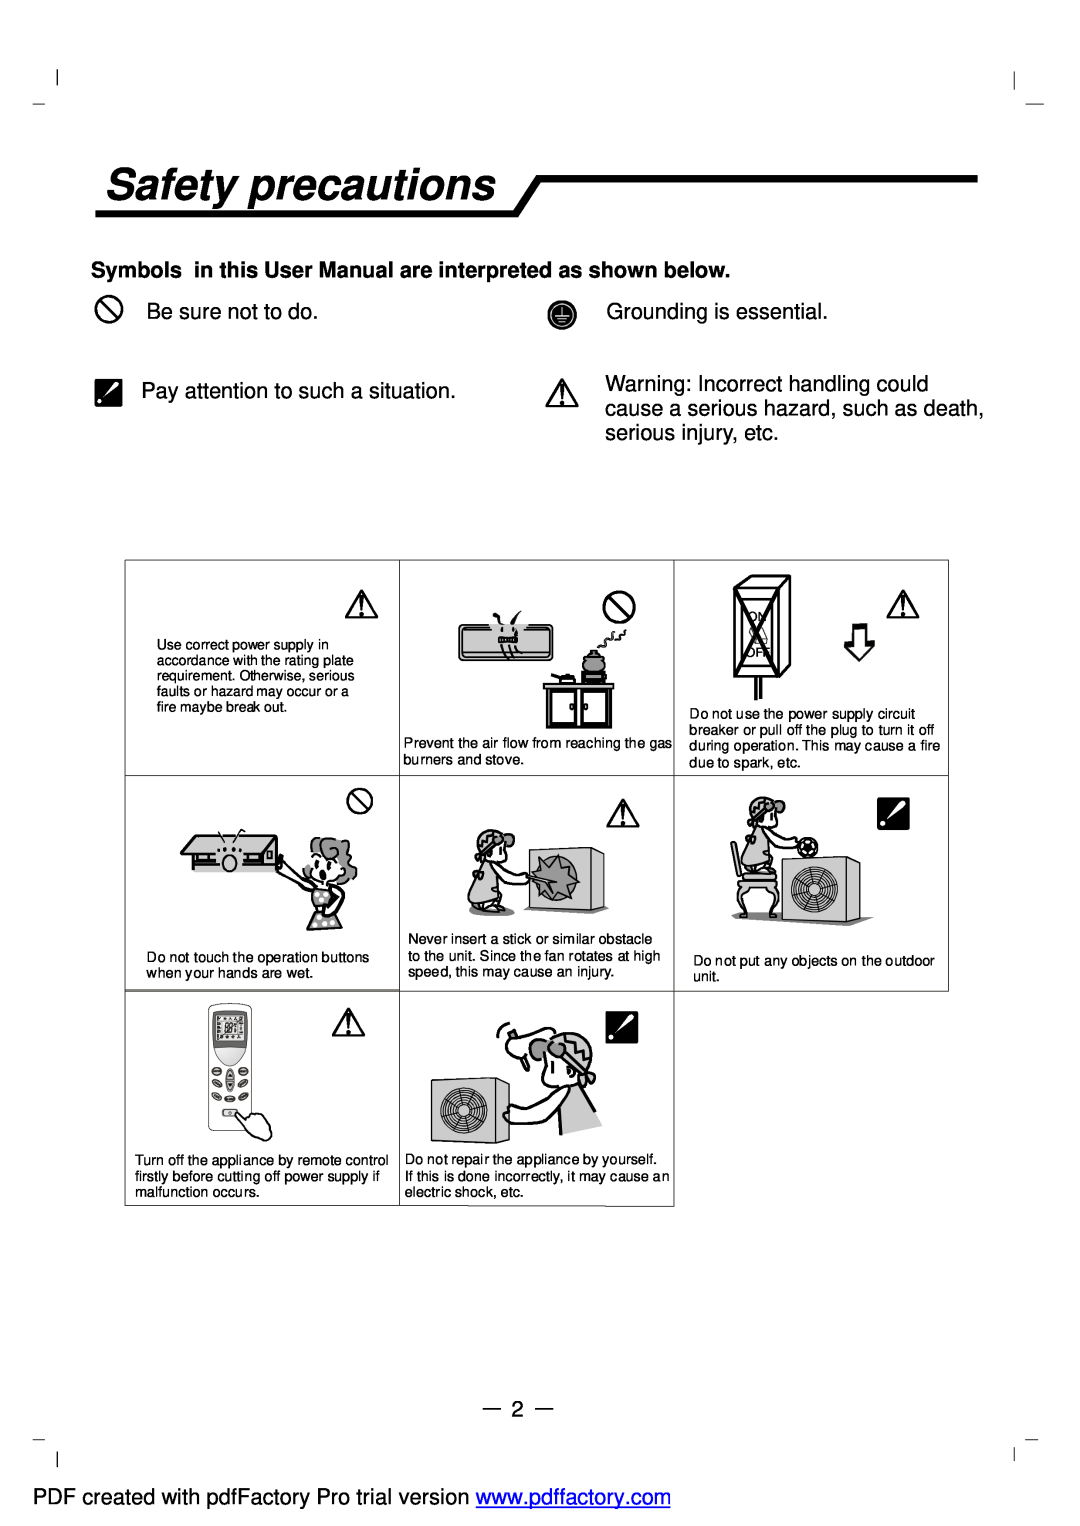 NEC RIH-6867 user manual Safety precautions, Be sure not to do, Grounding is essential, Pay attention to such a situation 